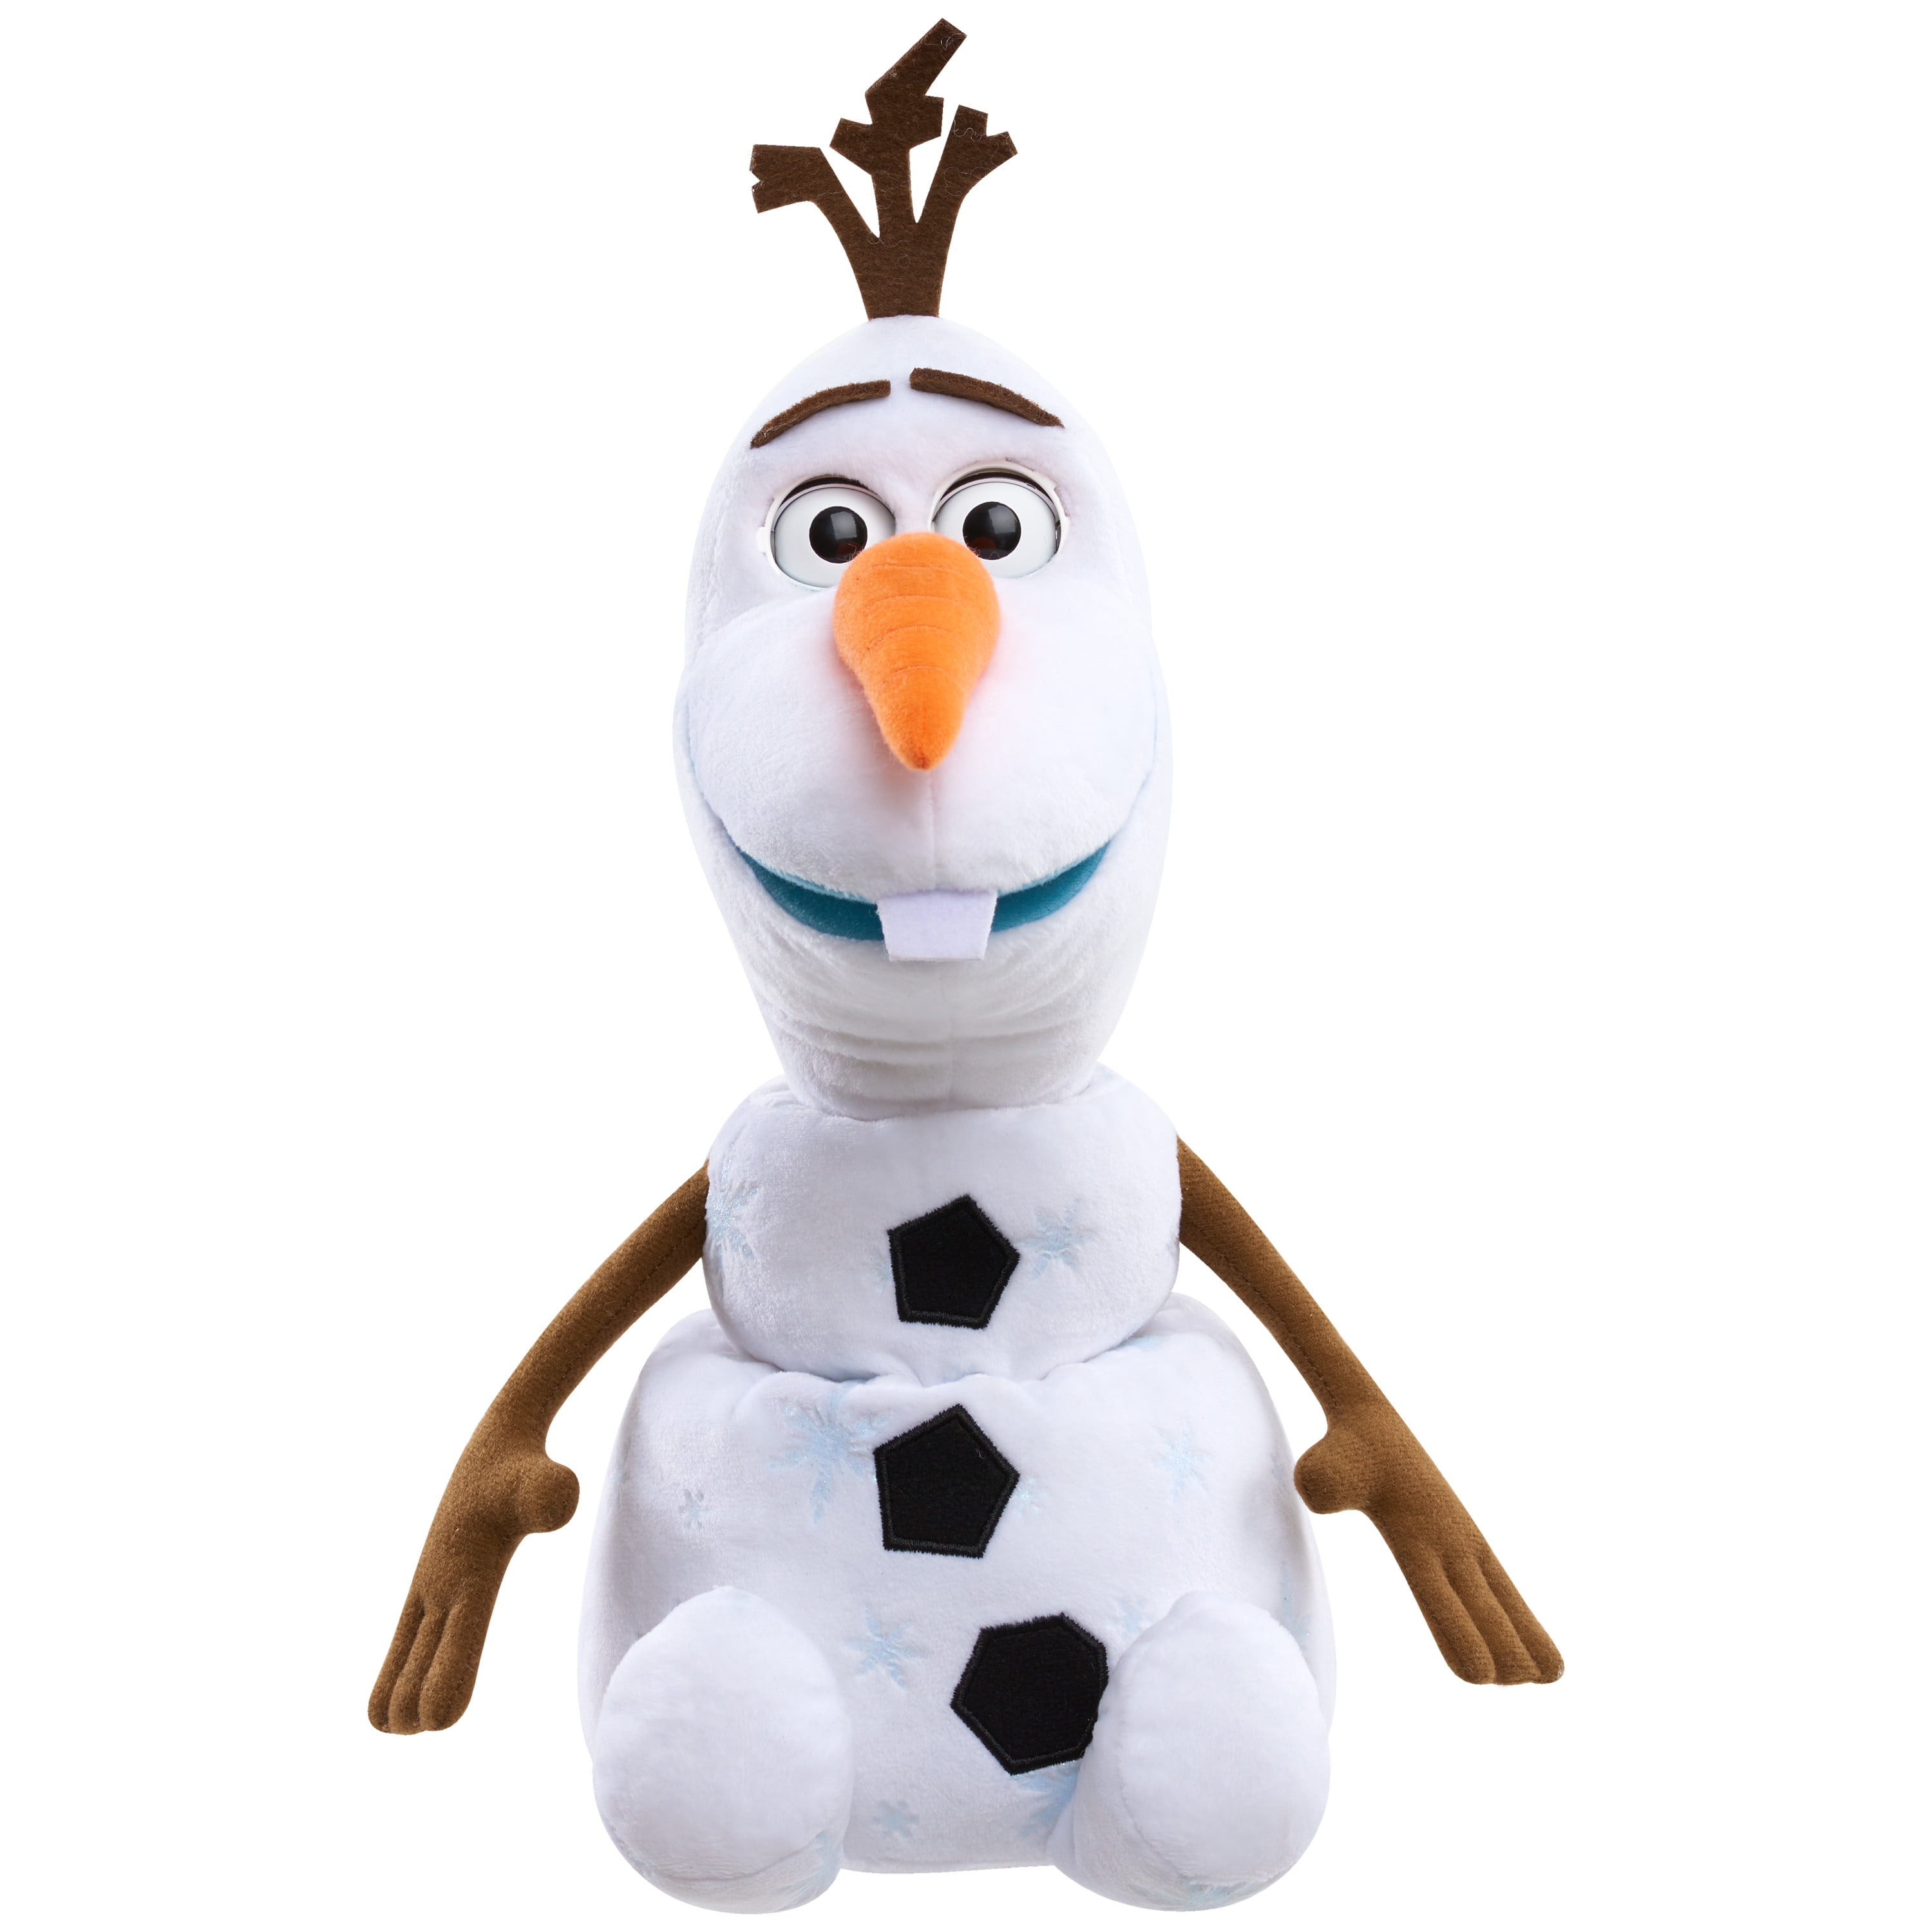 Disney's Frozen Olaf Throw Pillow by Jumping Beans $39.99 New with tags 